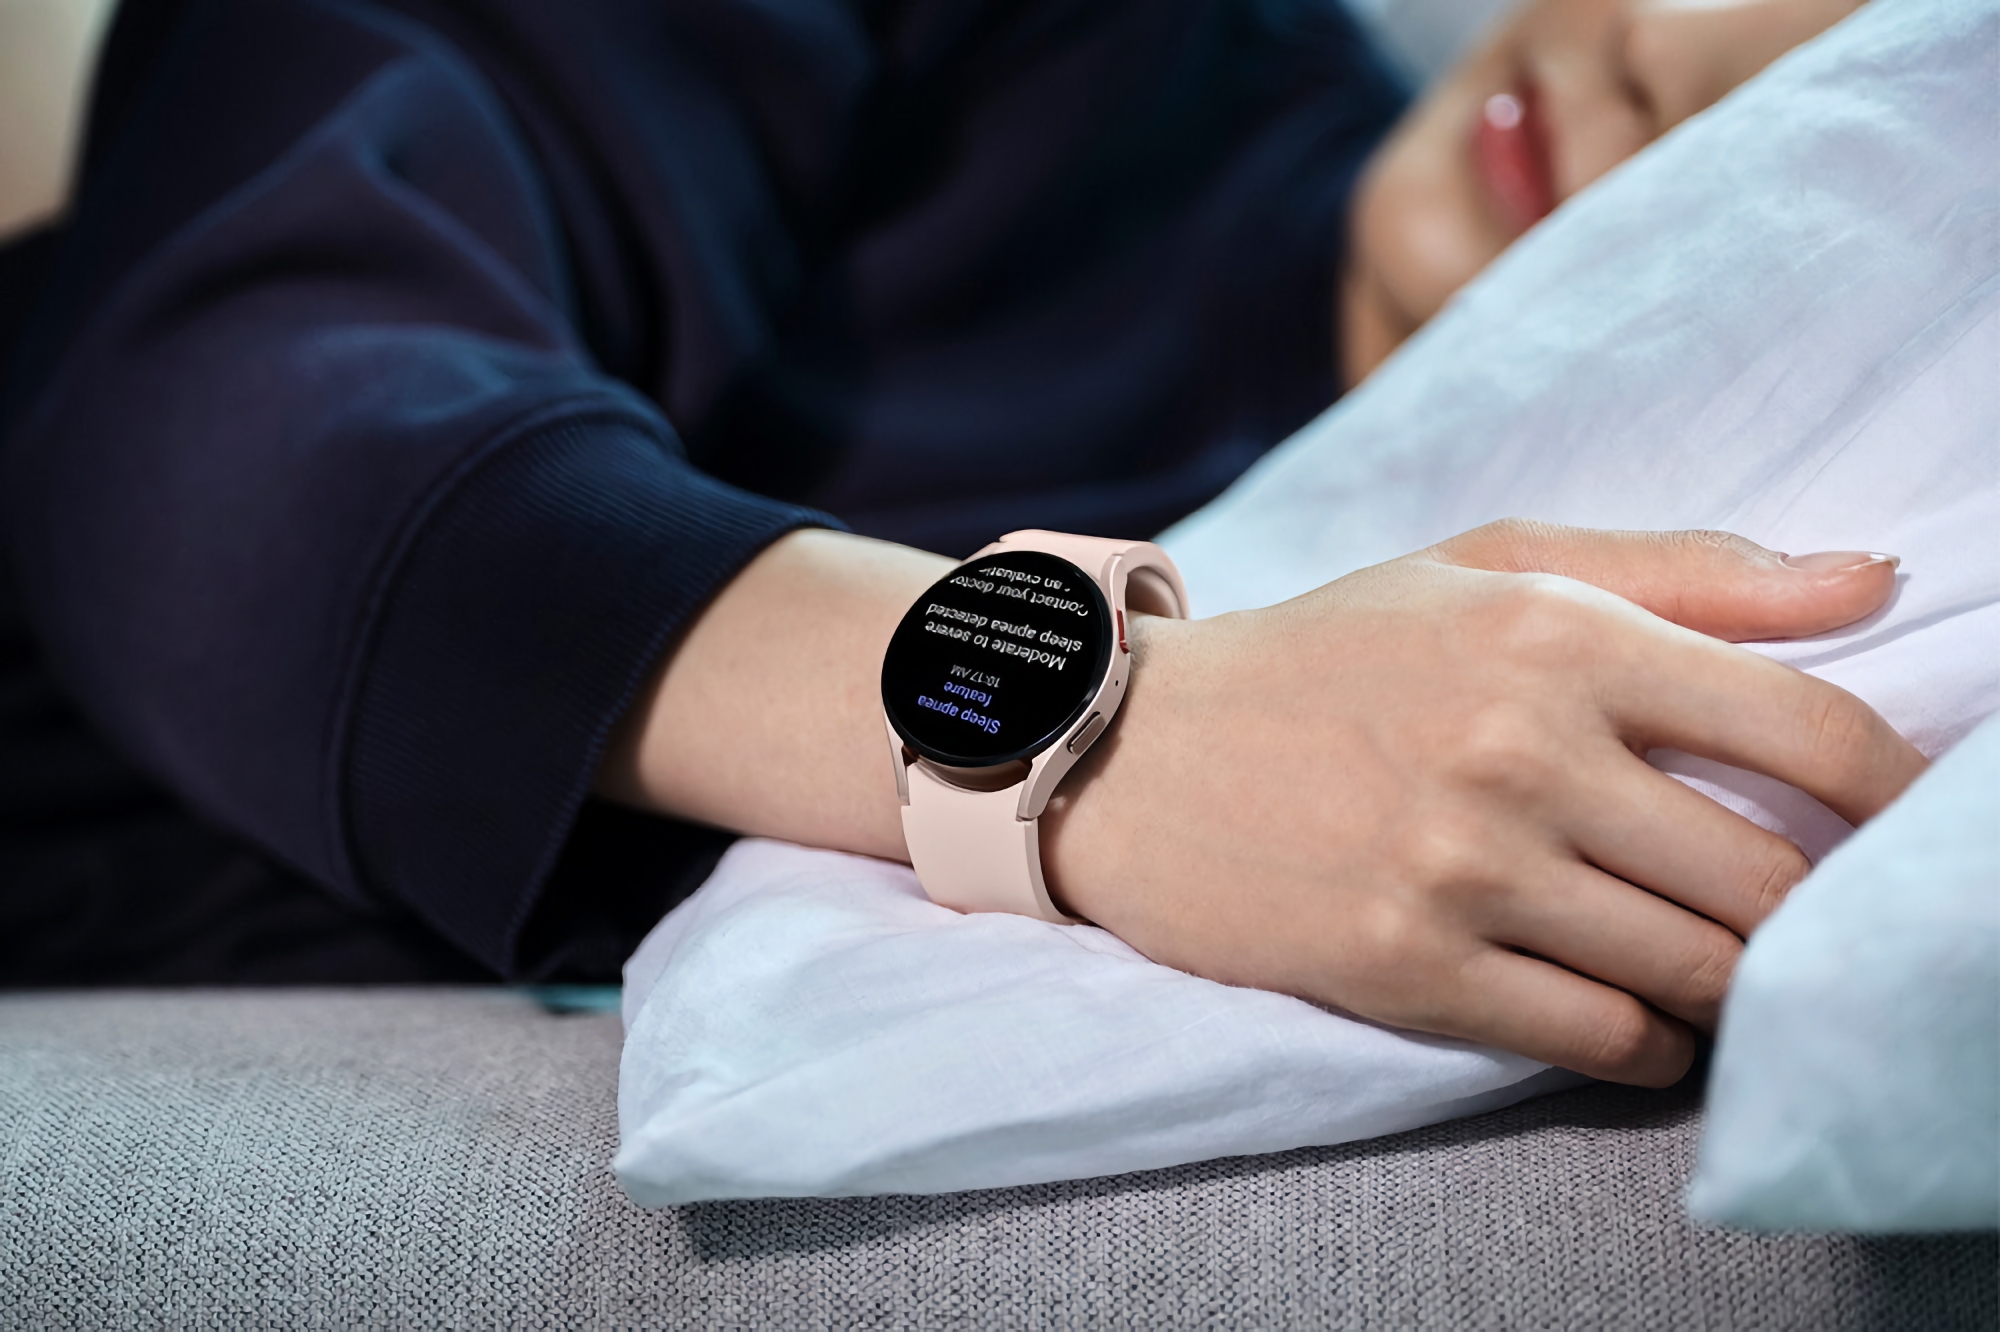 Samsung Galaxy Watch 5 and Galaxy Watch 6 will be able to recognise stop breathing movements during sleep